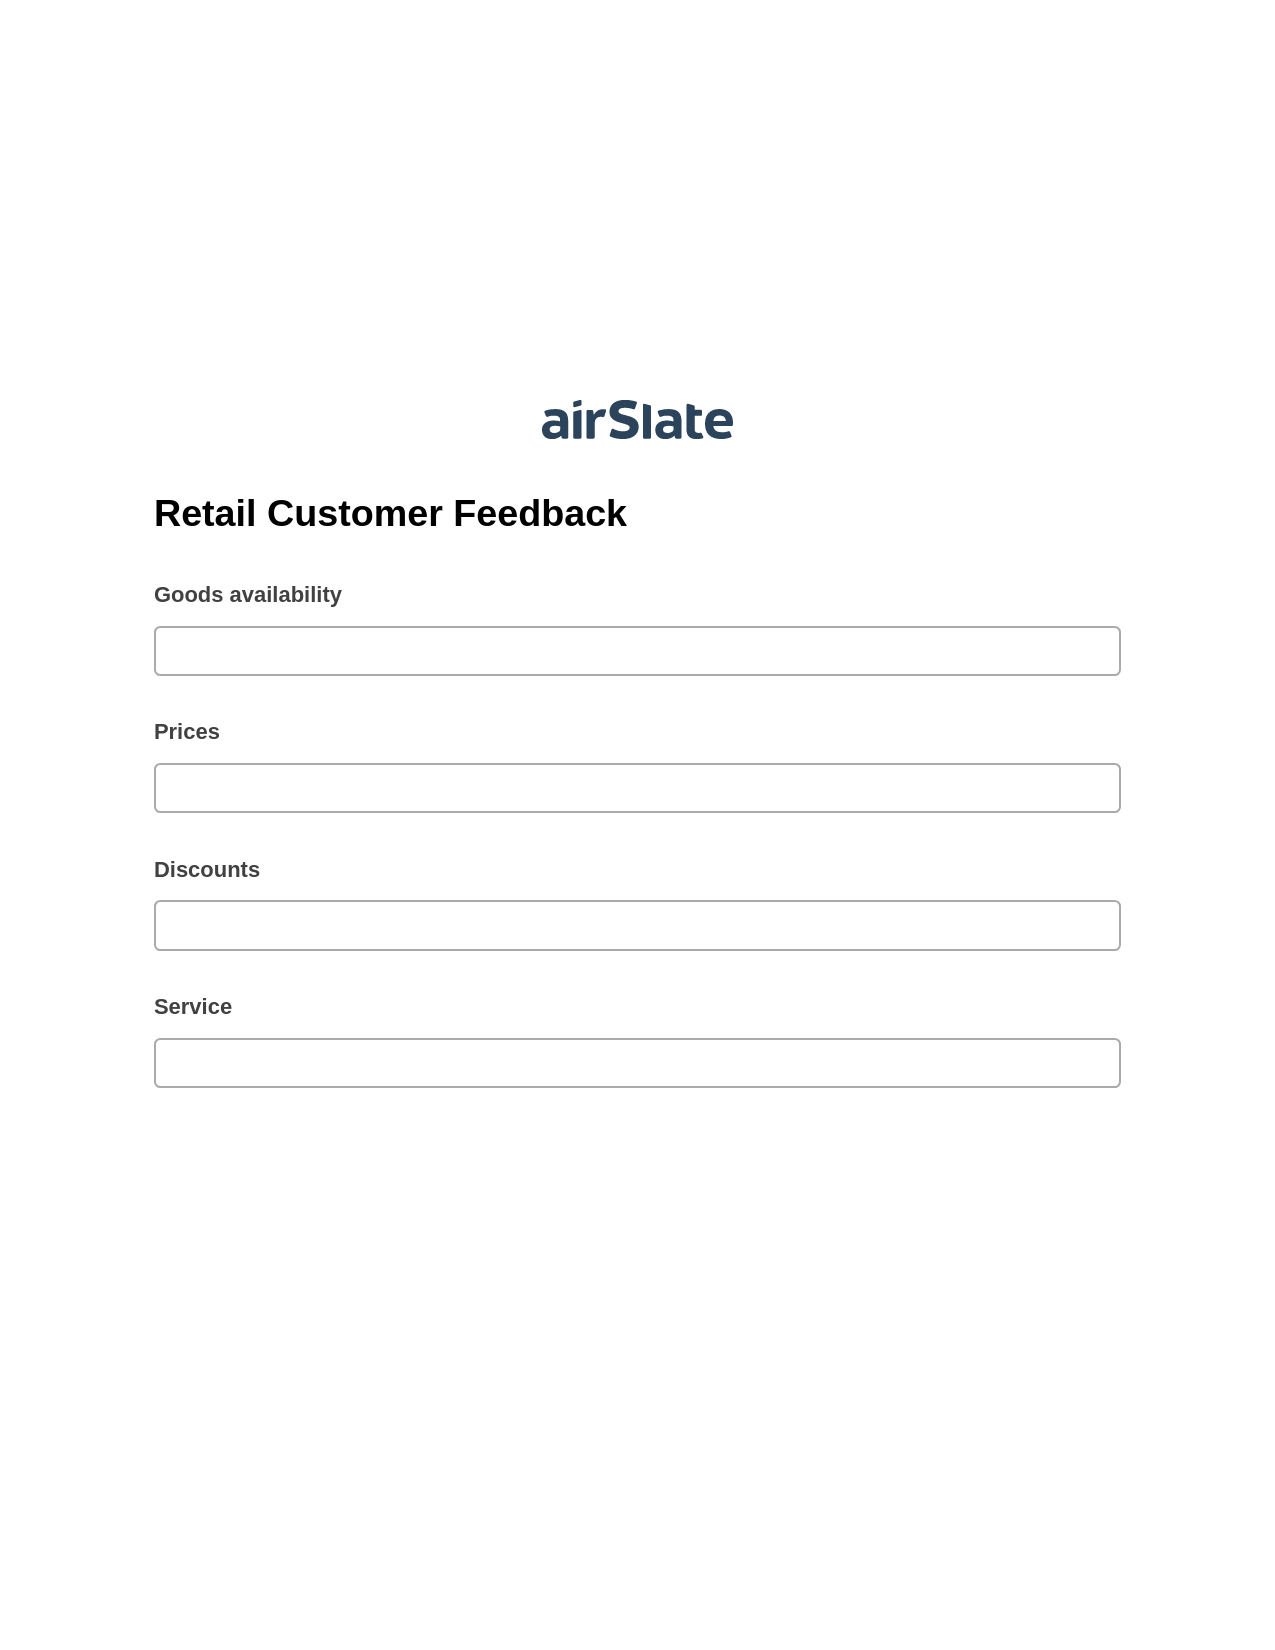 Retail Customer Feedback Pre-fill Document Bot, Create NetSuite Records Bot, Post-finish Document Bot